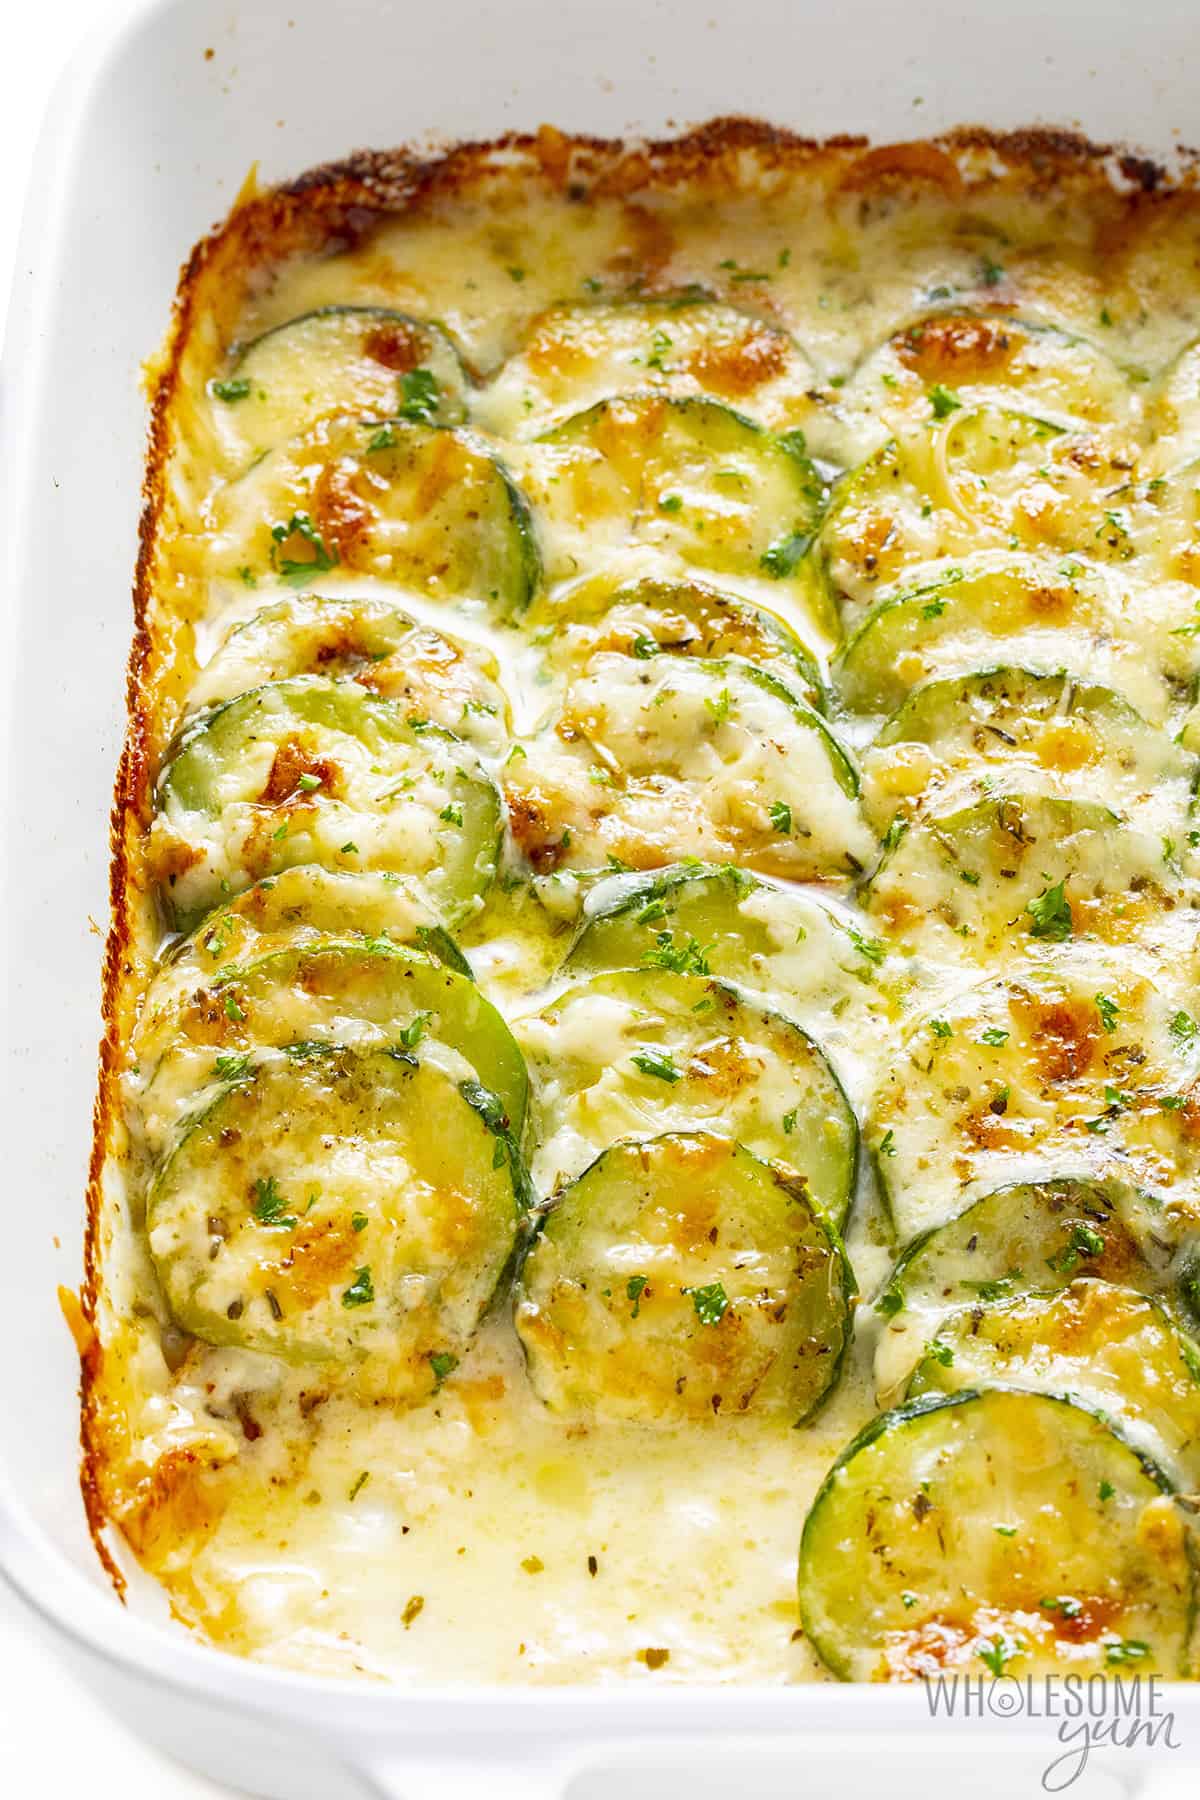 Zucchini gratin close up with some removed.